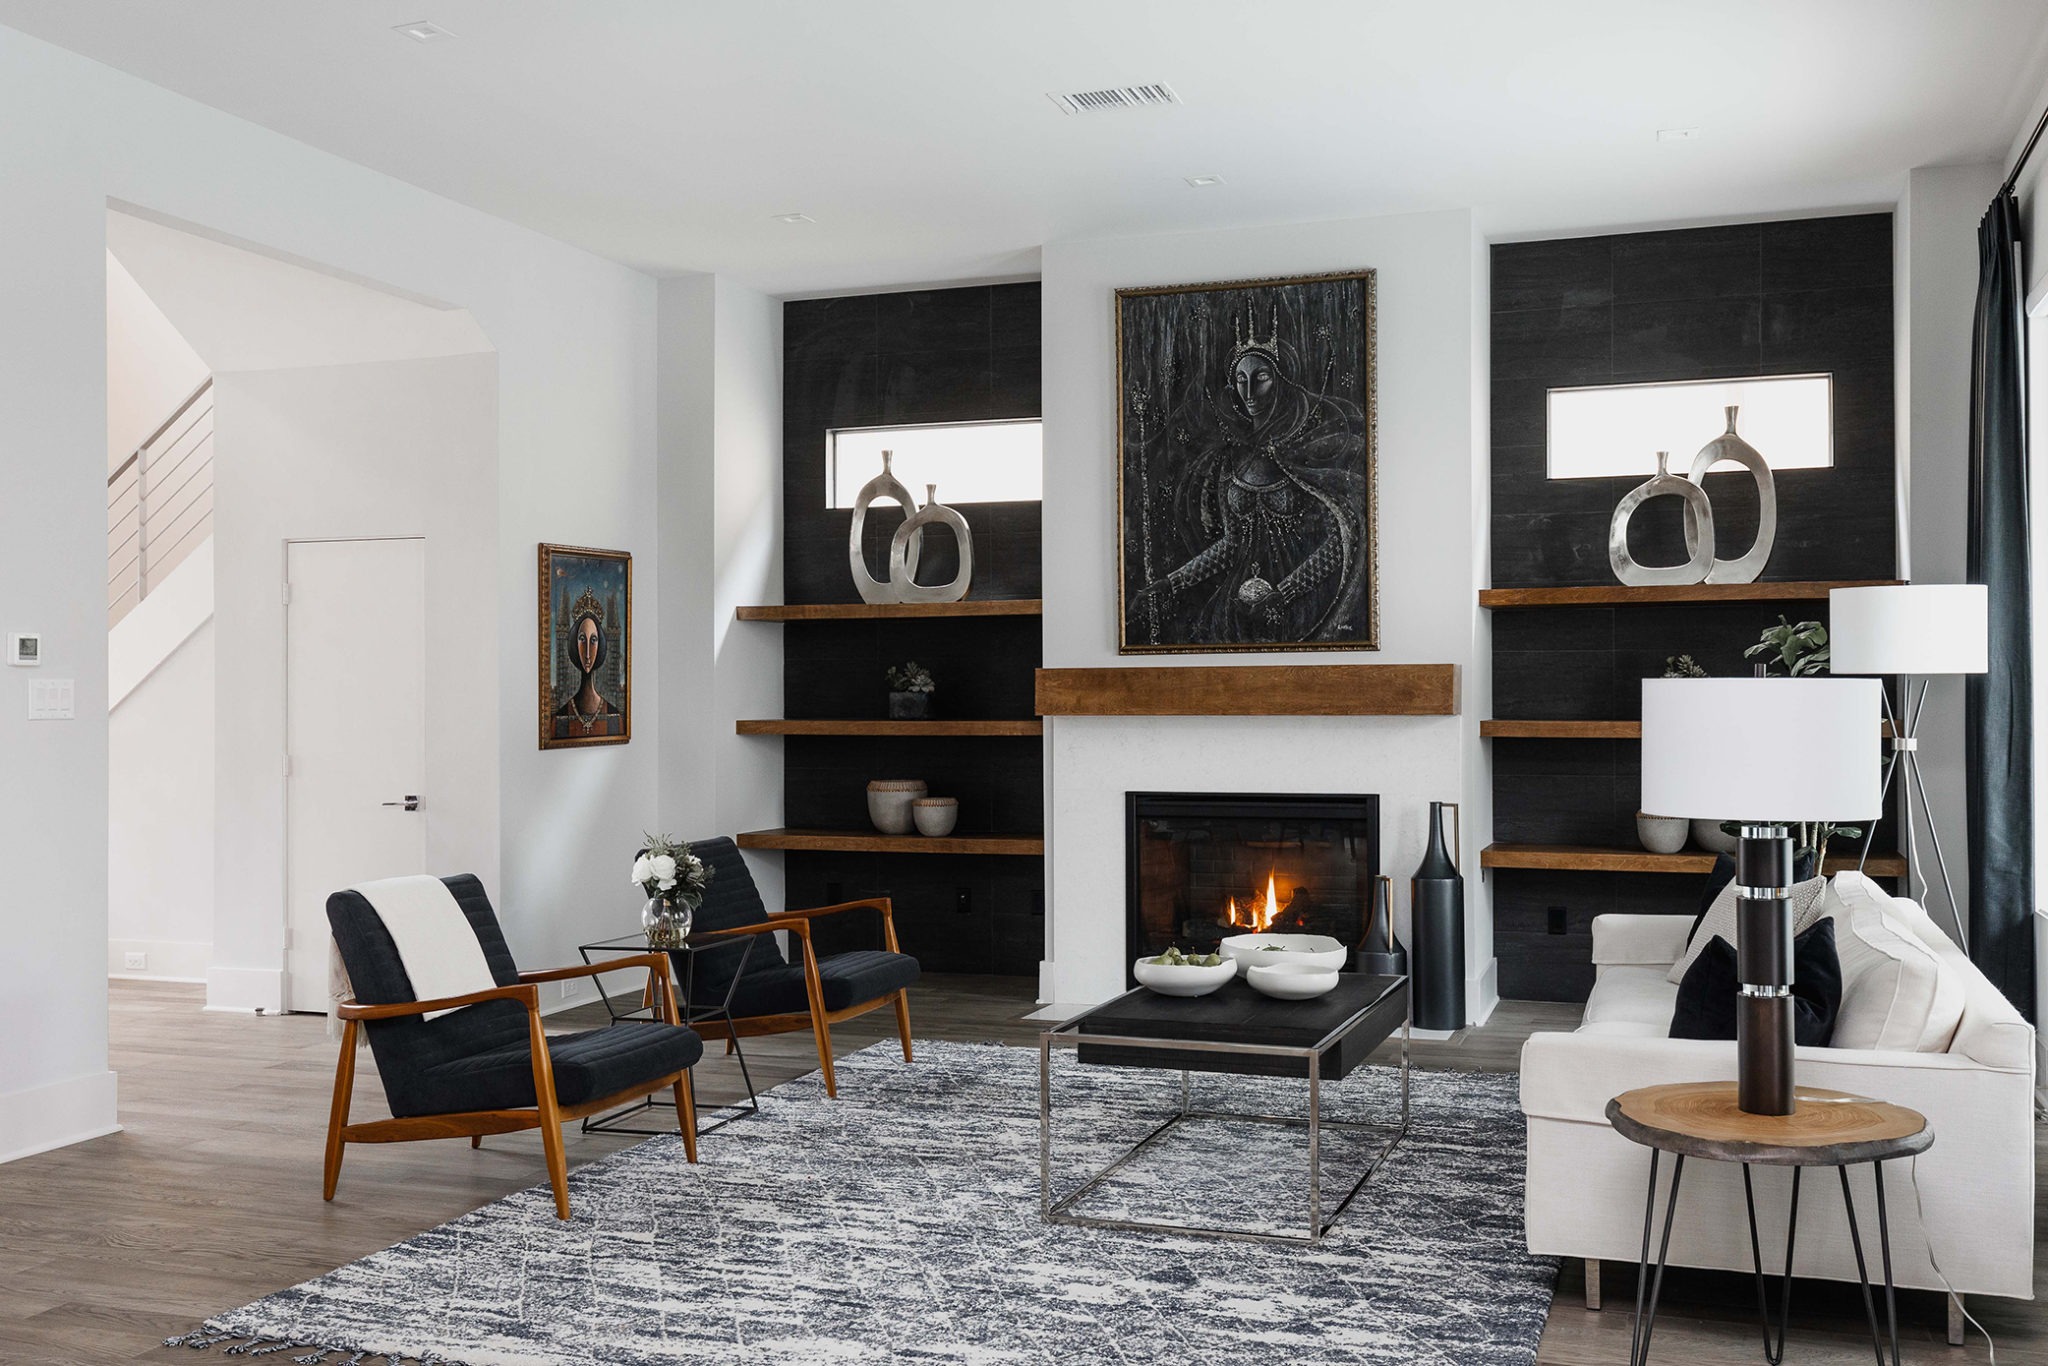 A room with white walls, black chair, center table, and fireplace